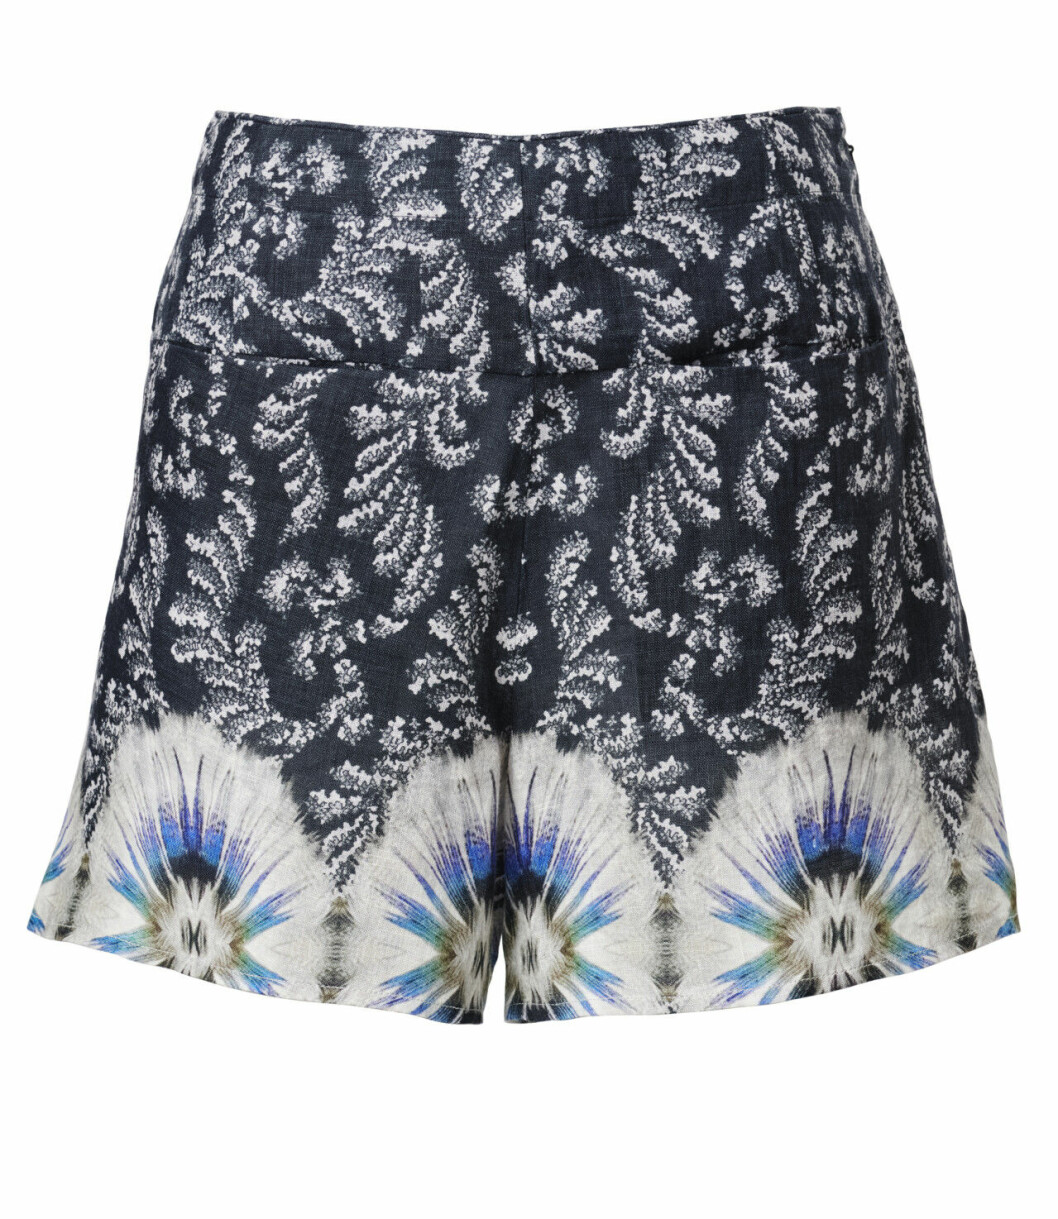 H&M Conscious Exclusive 2019 mönstrade shorts